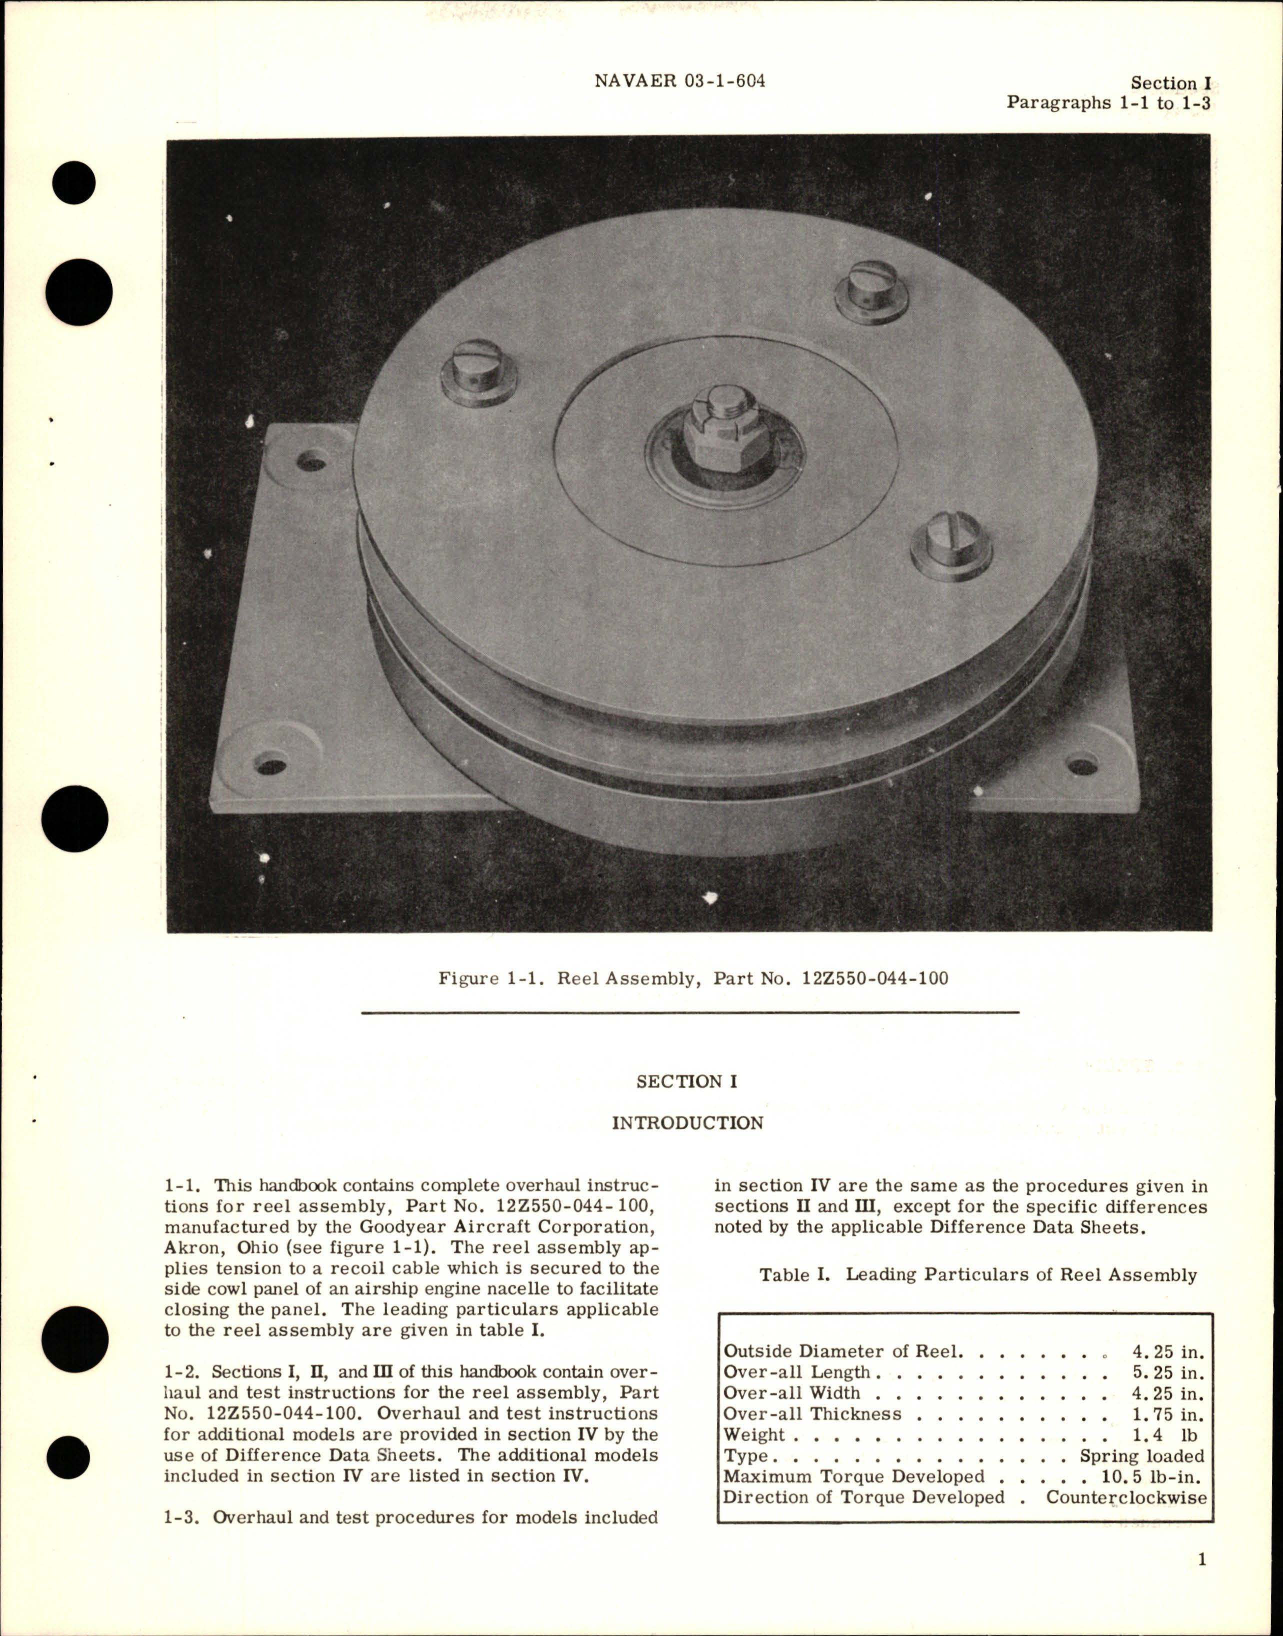 Sample page 5 from AirCorps Library document: Overhaul Instructions for Reel Assemblies - Parts 12Z550-044-100 and 12Z550-044-200